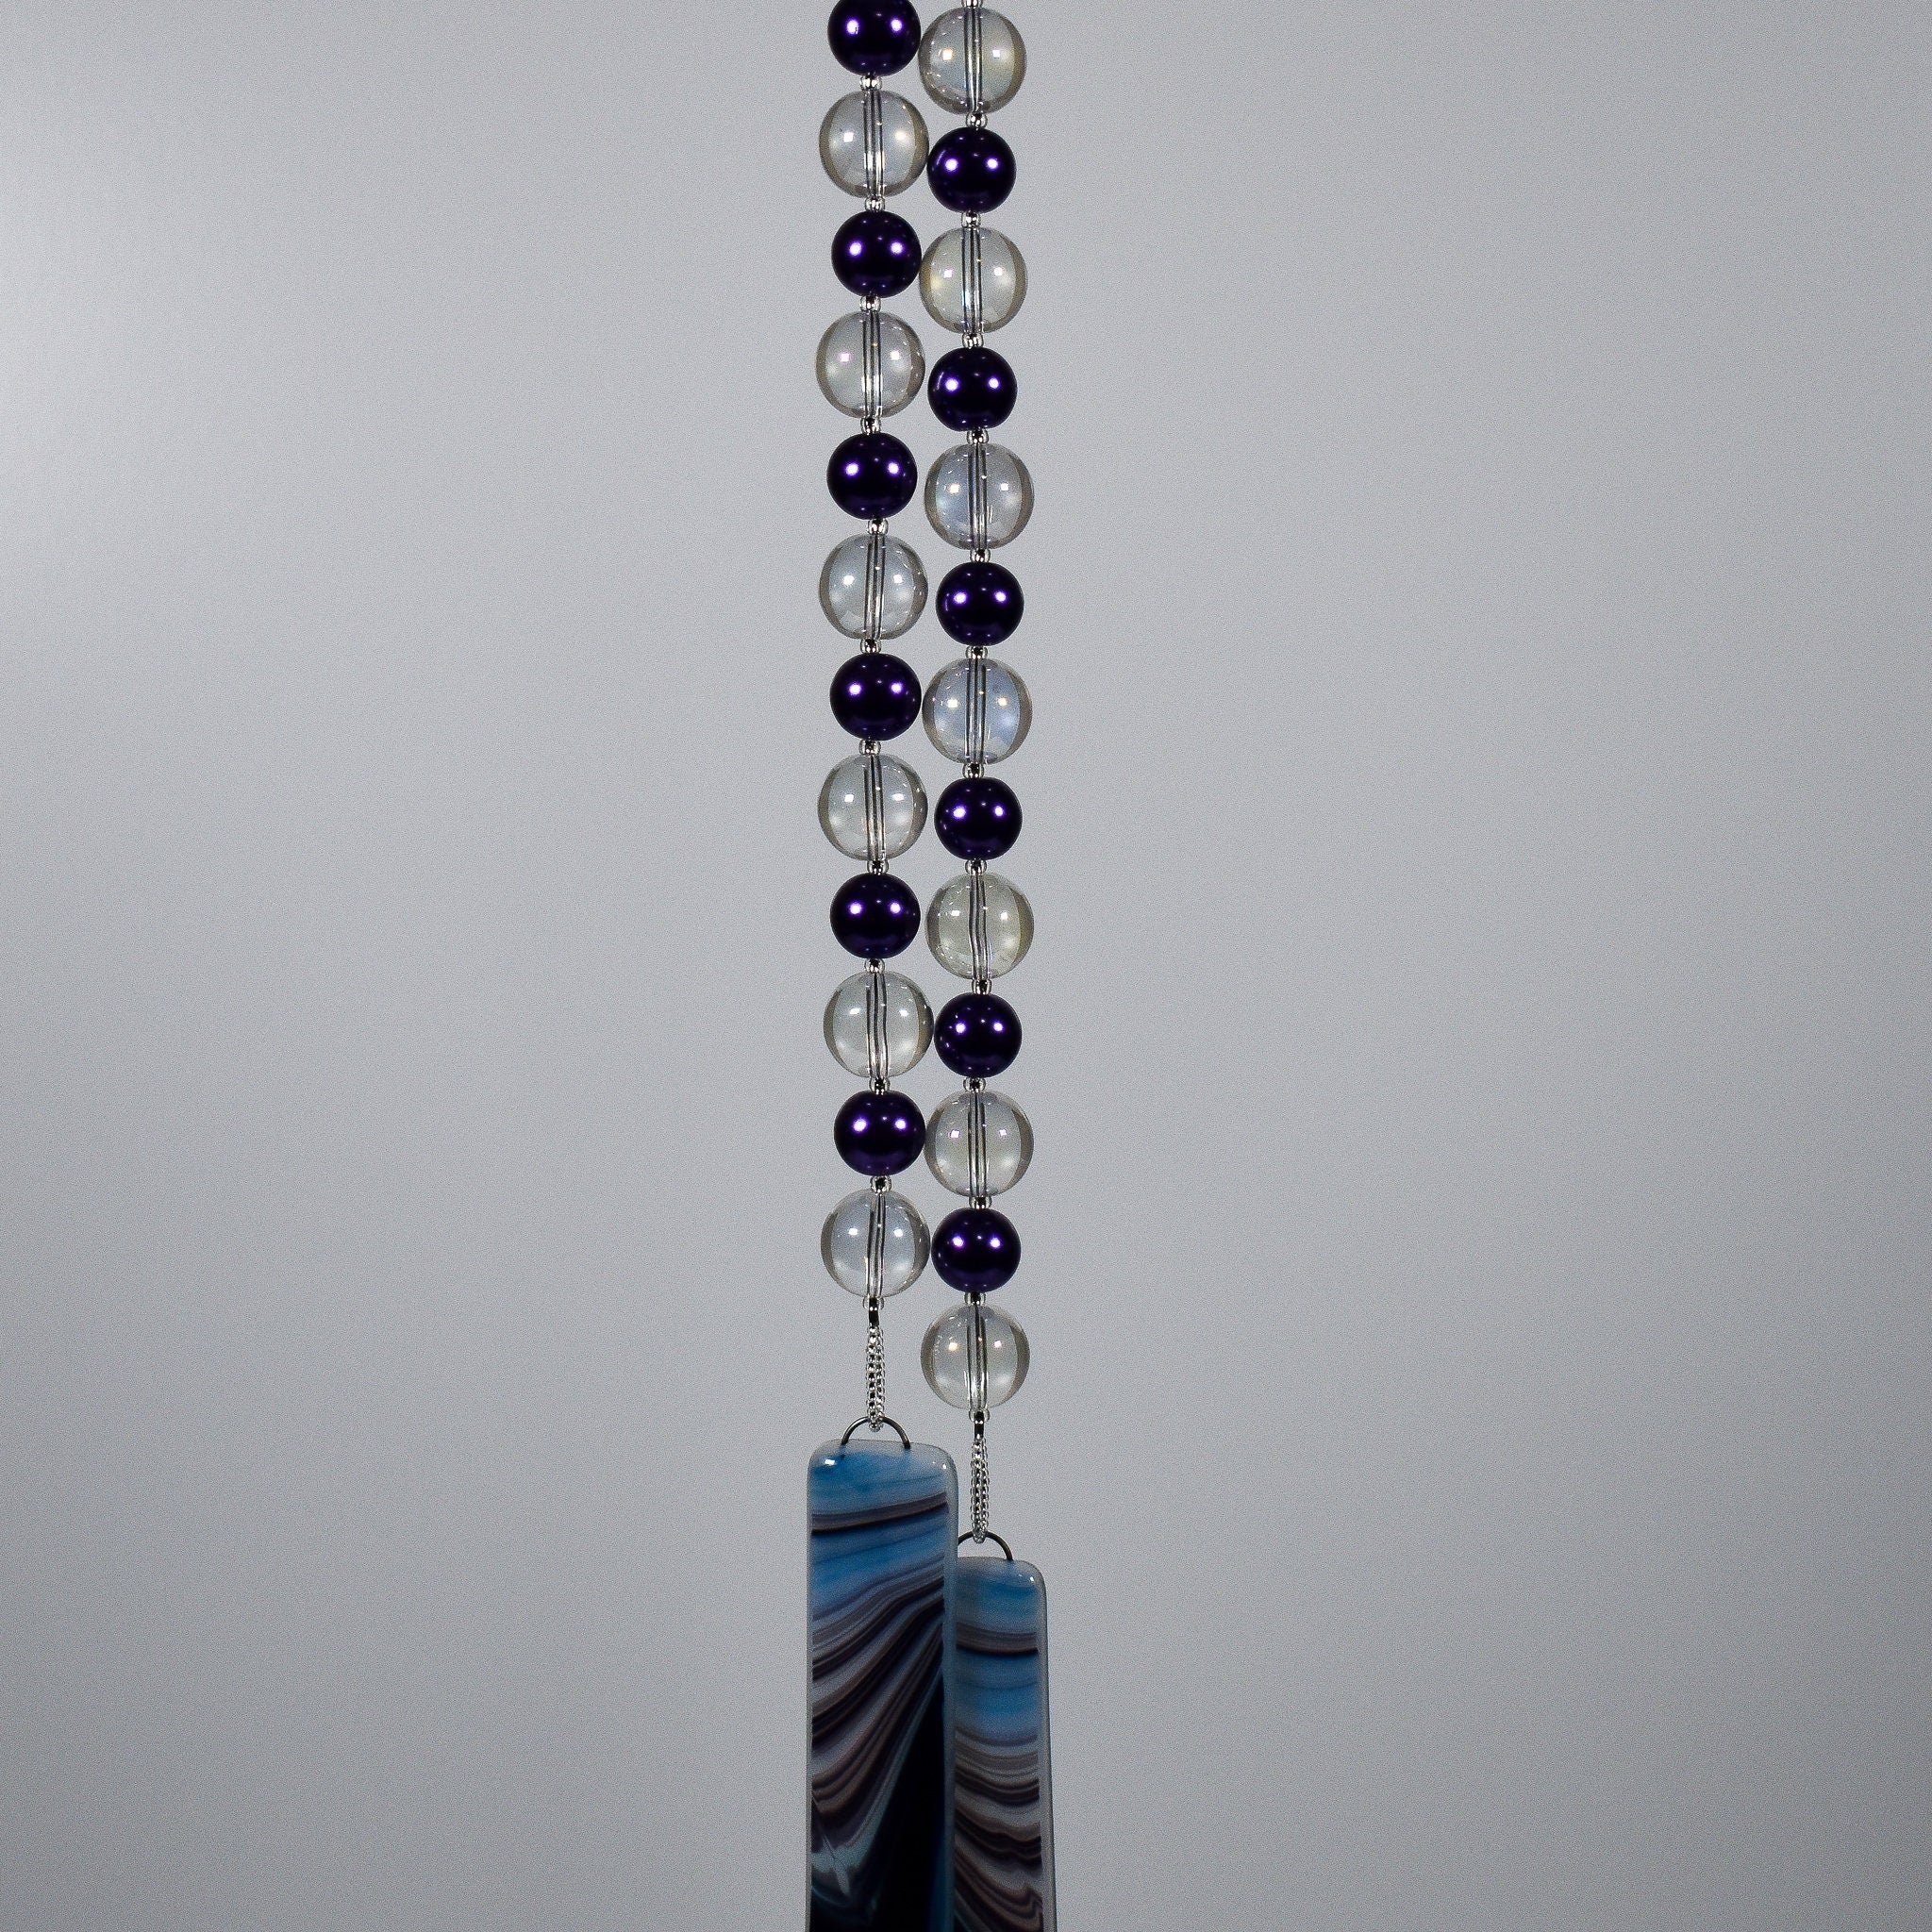 Purple Pearl Glass Sun-Catching Wind Chime for Patio, Balcony, Garden